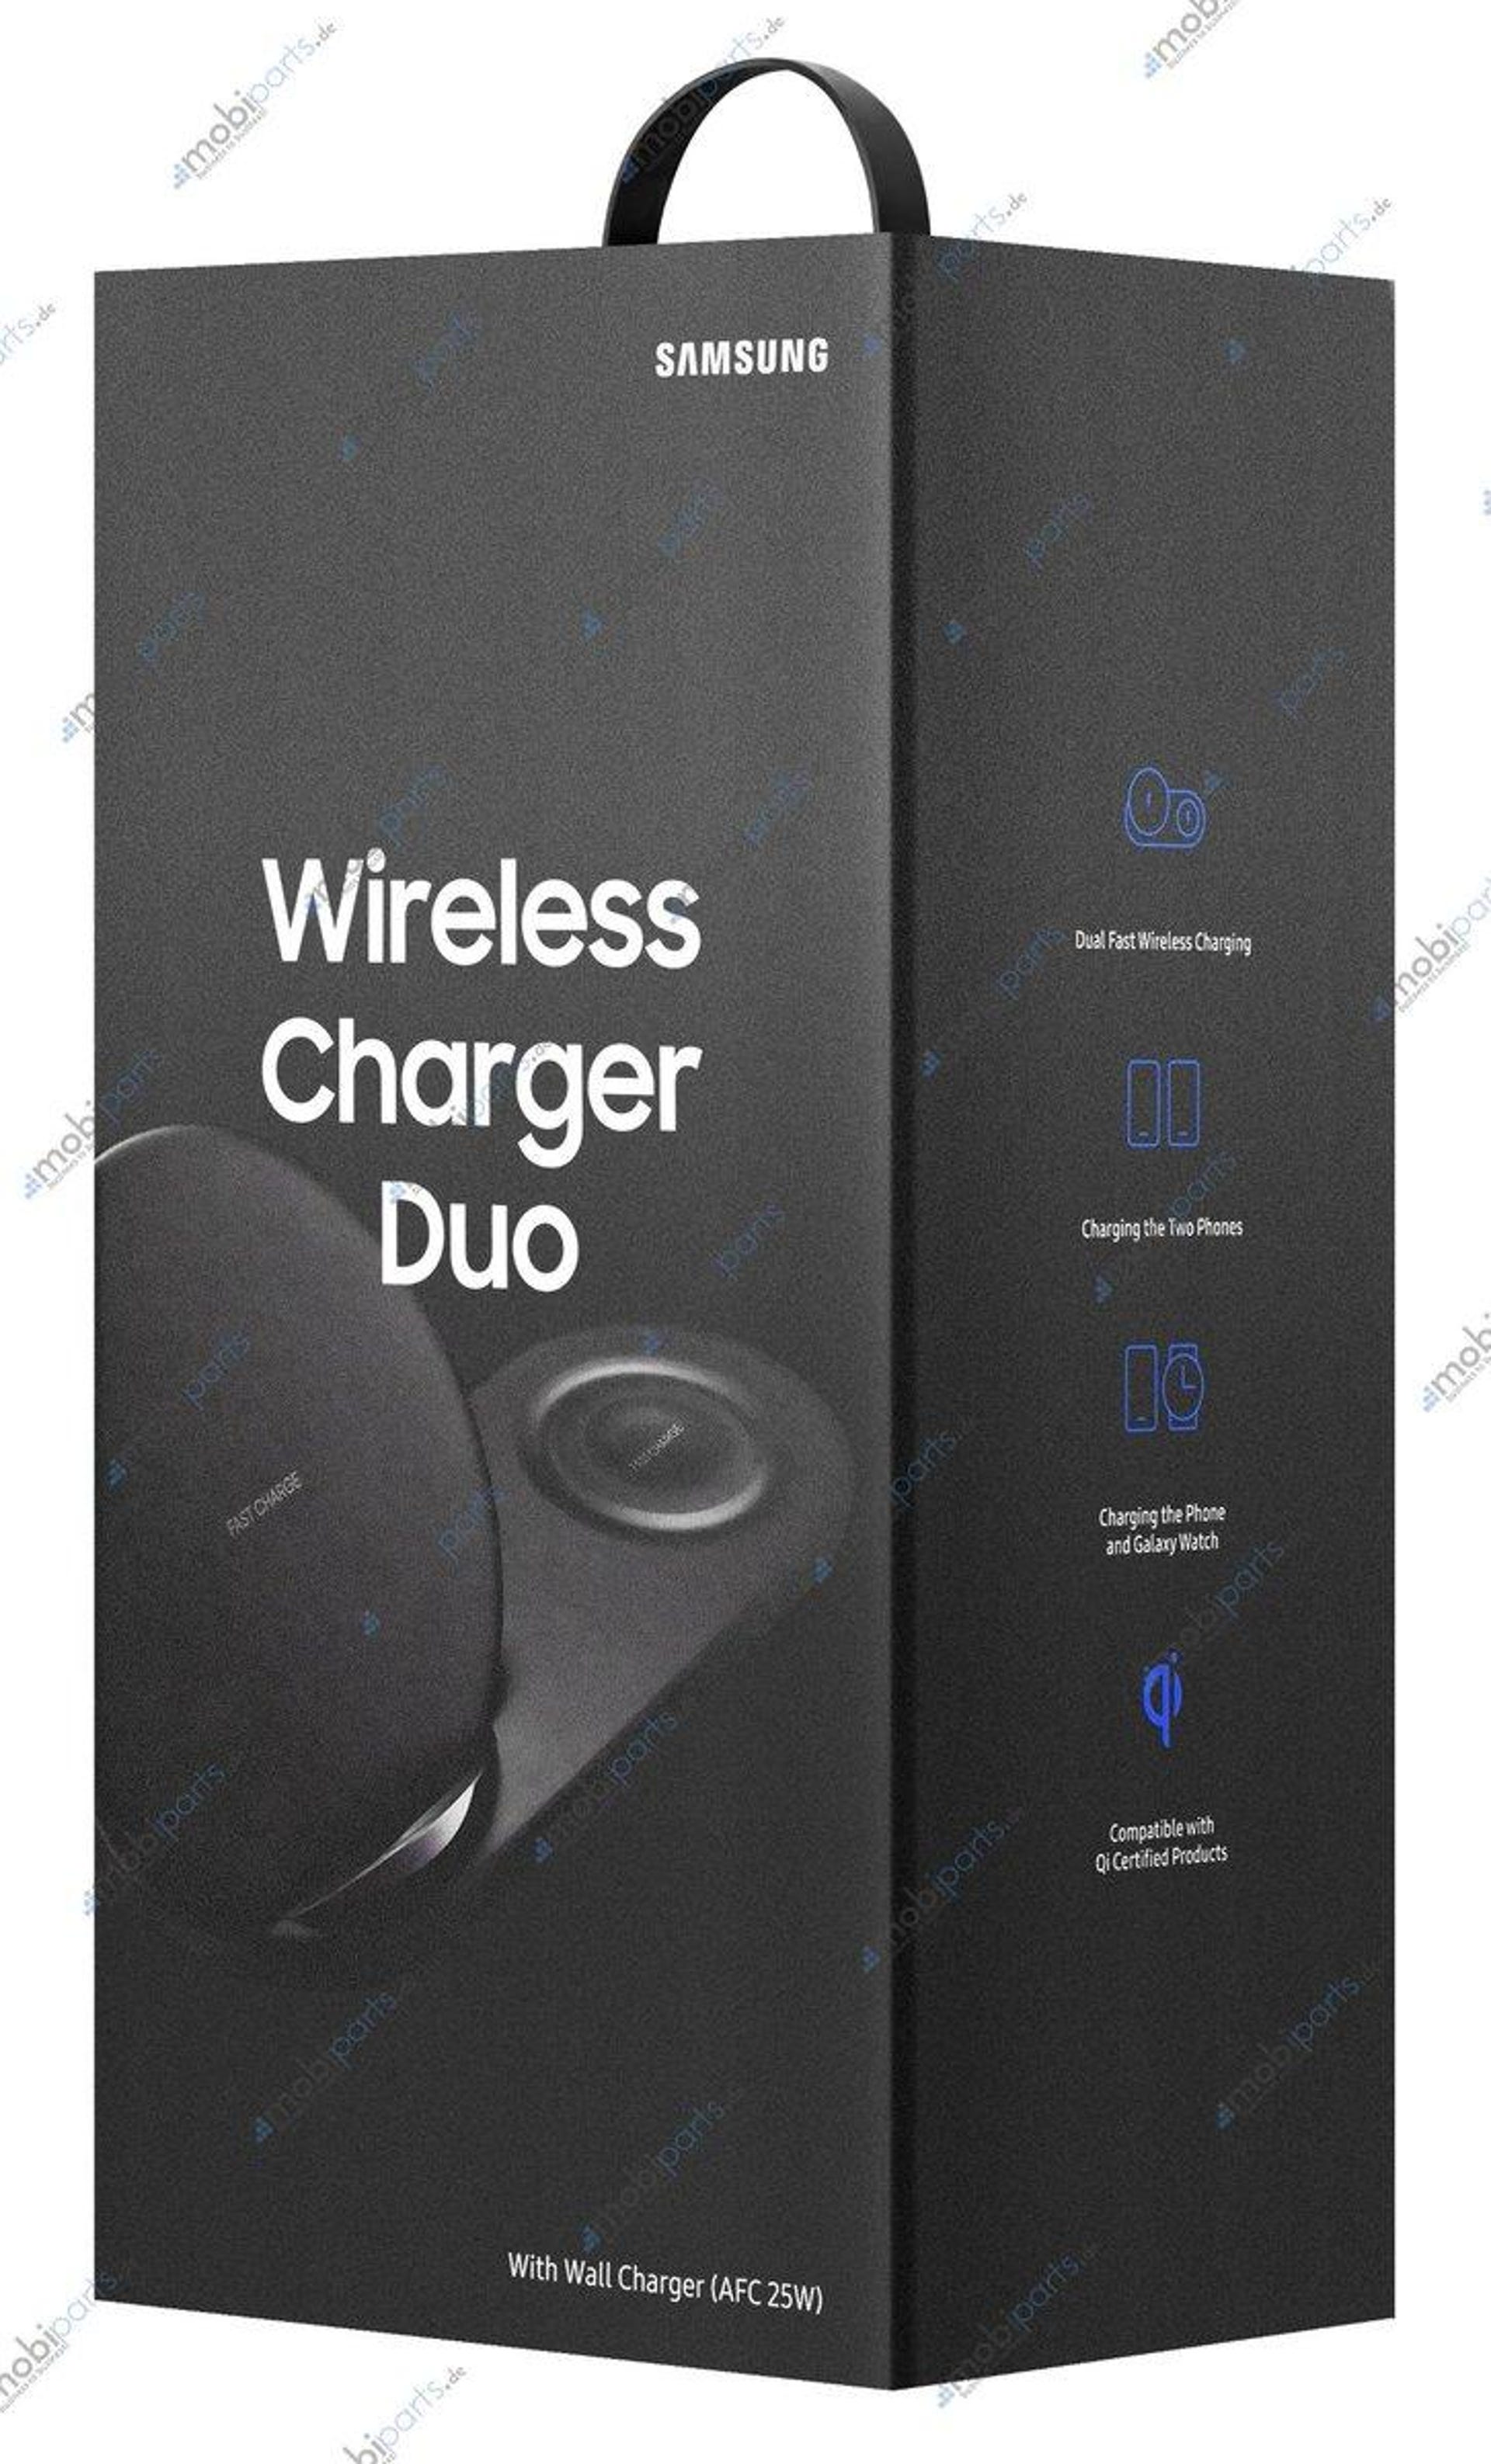 Samsung 'Wireless Charger Duo' might appear with Galaxy Note 9 at Unpacked  - CNET